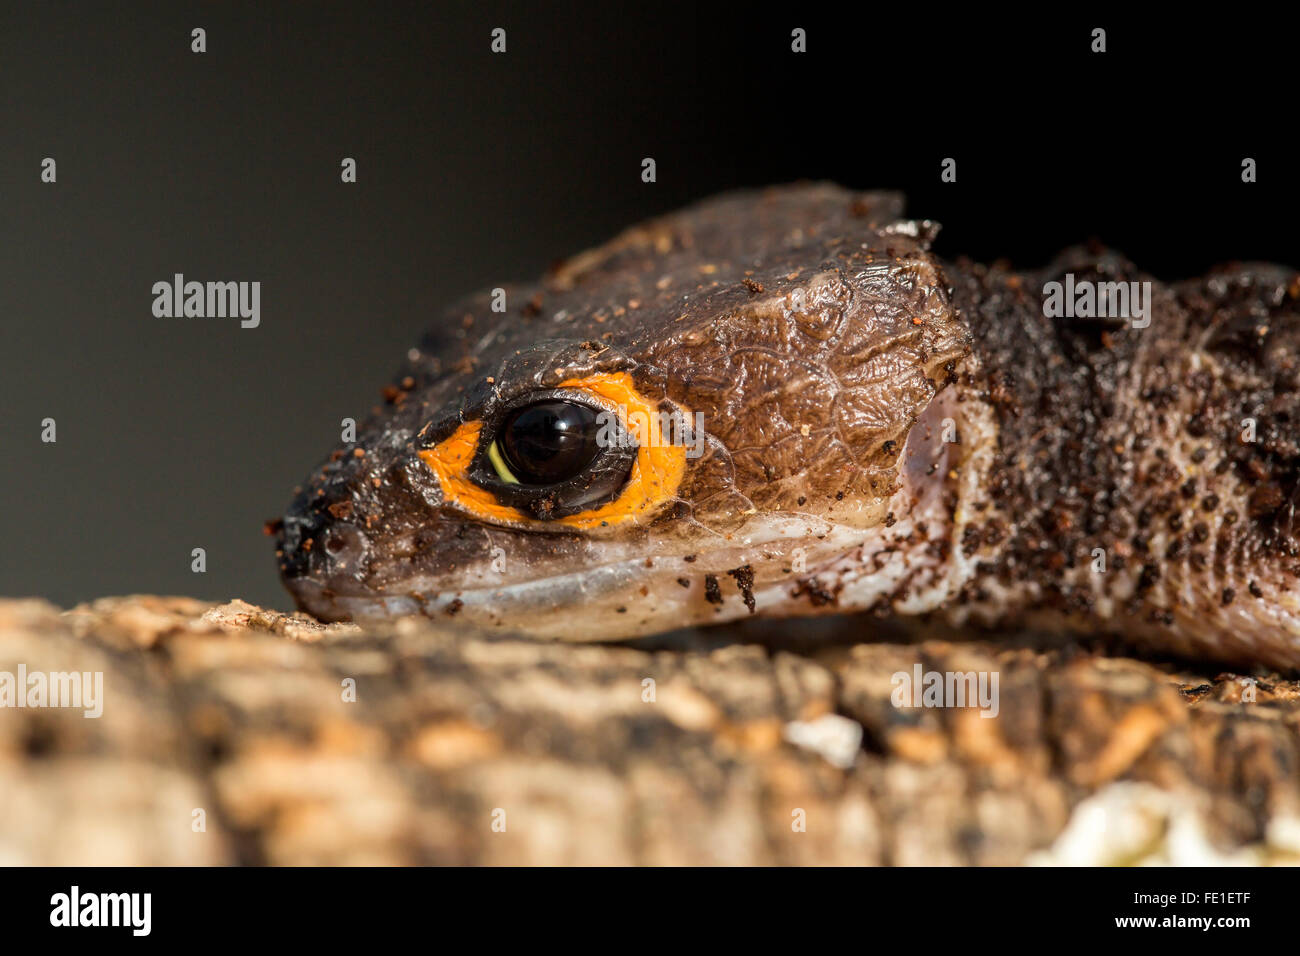 Closeup of the head of a red eyed crocodile skink, Tribolonotus gracilis Stock Photo